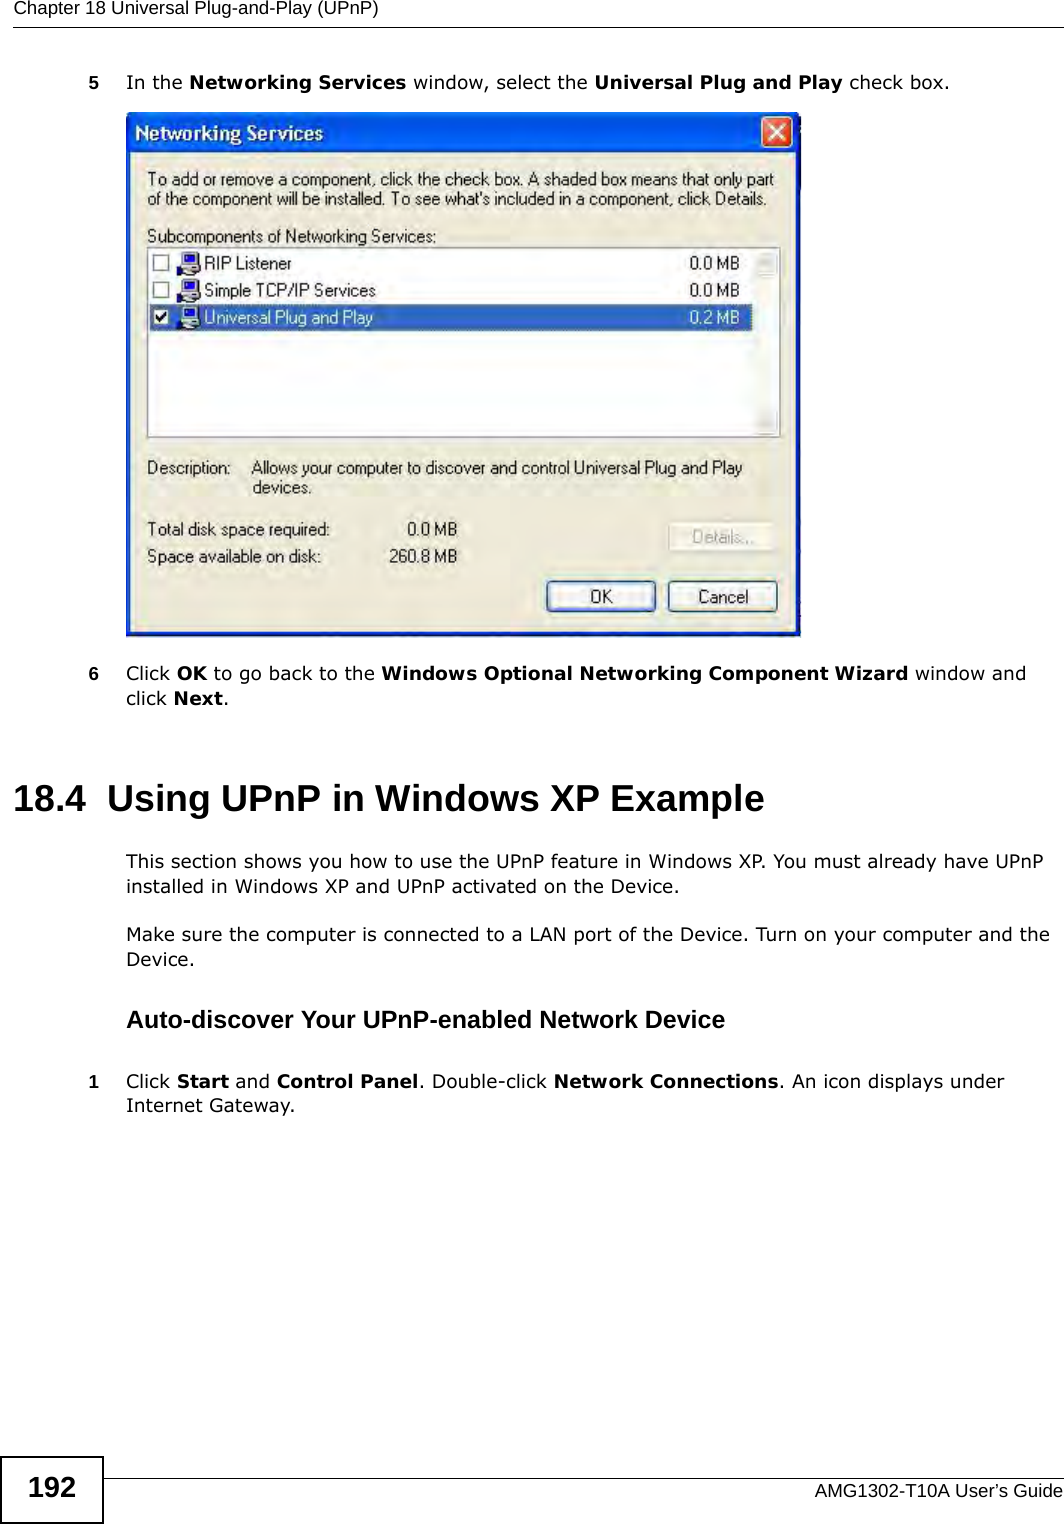 Chapter 18 Universal Plug-and-Play (UPnP)AMG1302-T10A User’s Guide1925In the Networking Services window, select the Universal Plug and Play check box. Networking Services6Click OK to go back to the Windows Optional Networking Component Wizard window and click Next. 18.4  Using UPnP in Windows XP ExampleThis section shows you how to use the UPnP feature in Windows XP. You must already have UPnP installed in Windows XP and UPnP activated on the Device.Make sure the computer is connected to a LAN port of the Device. Turn on your computer and the Device. Auto-discover Your UPnP-enabled Network Device1Click Start and Control Panel. Double-click Network Connections. An icon displays under Internet Gateway.